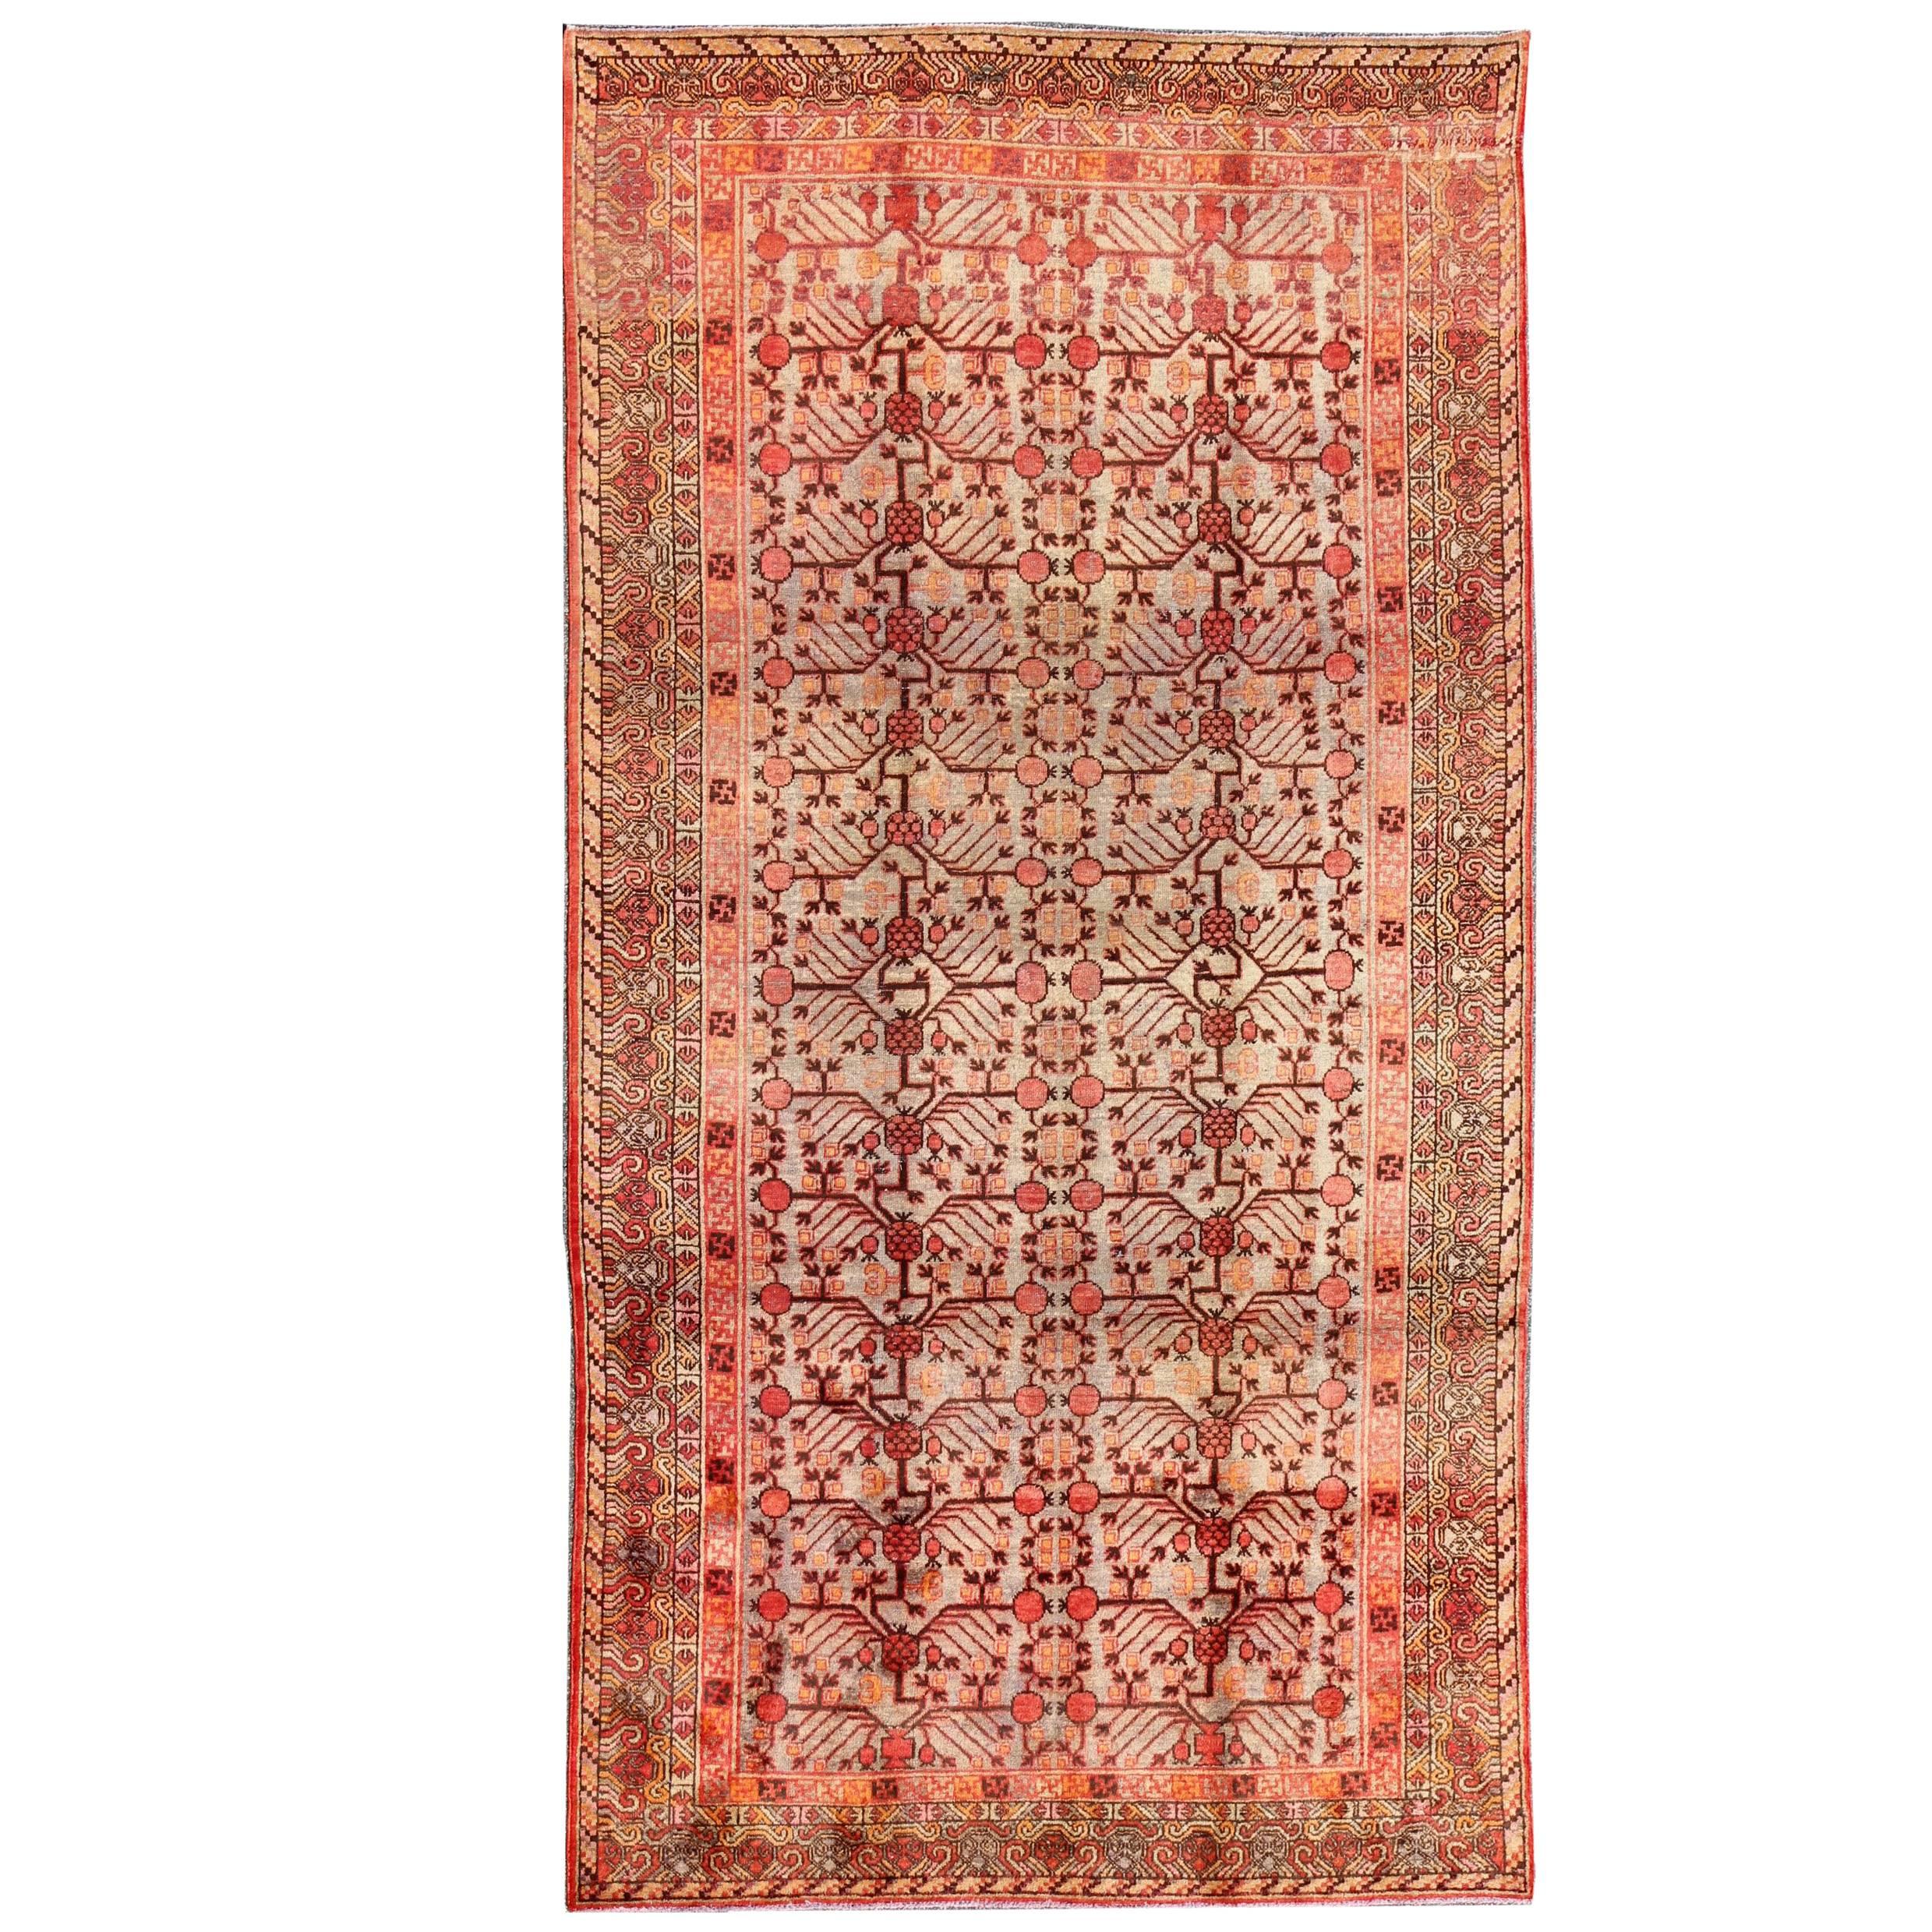 Large Khotan Antique Rug with Pomegranate Design in Taupe, Green, Red and Brown